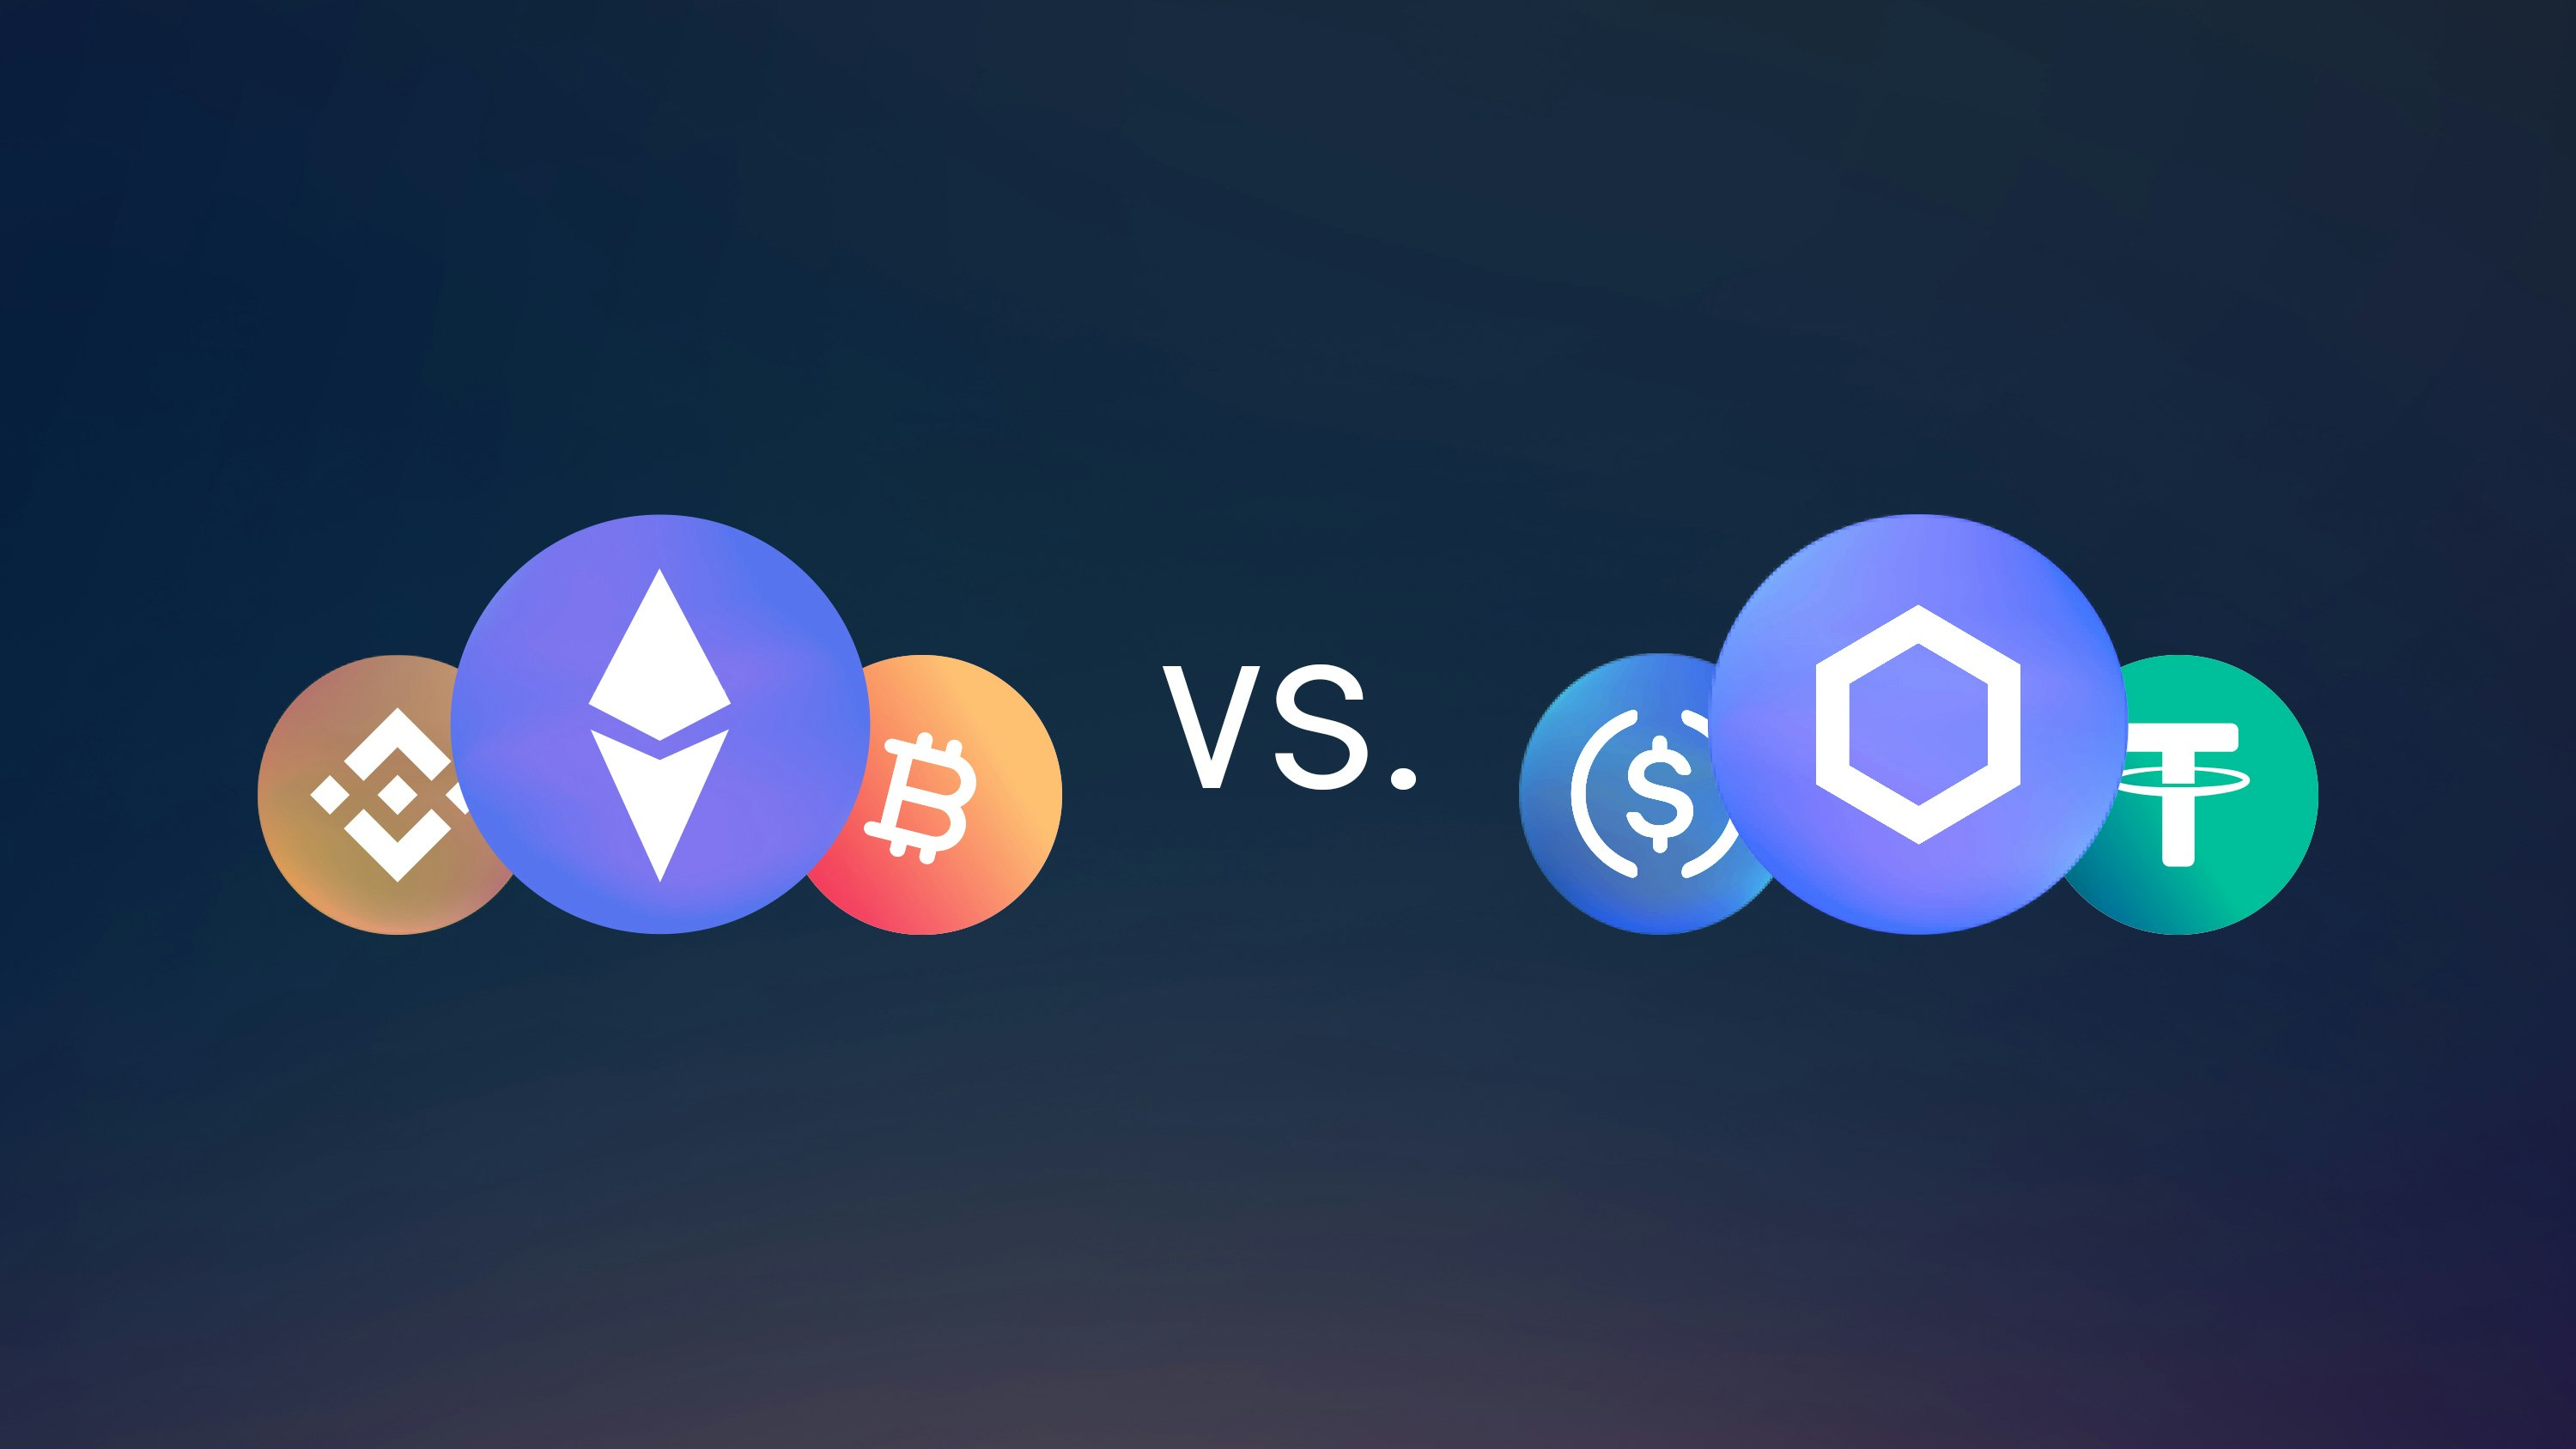 crypto coin icons opposing crypto token icons in graphic against dark blue background